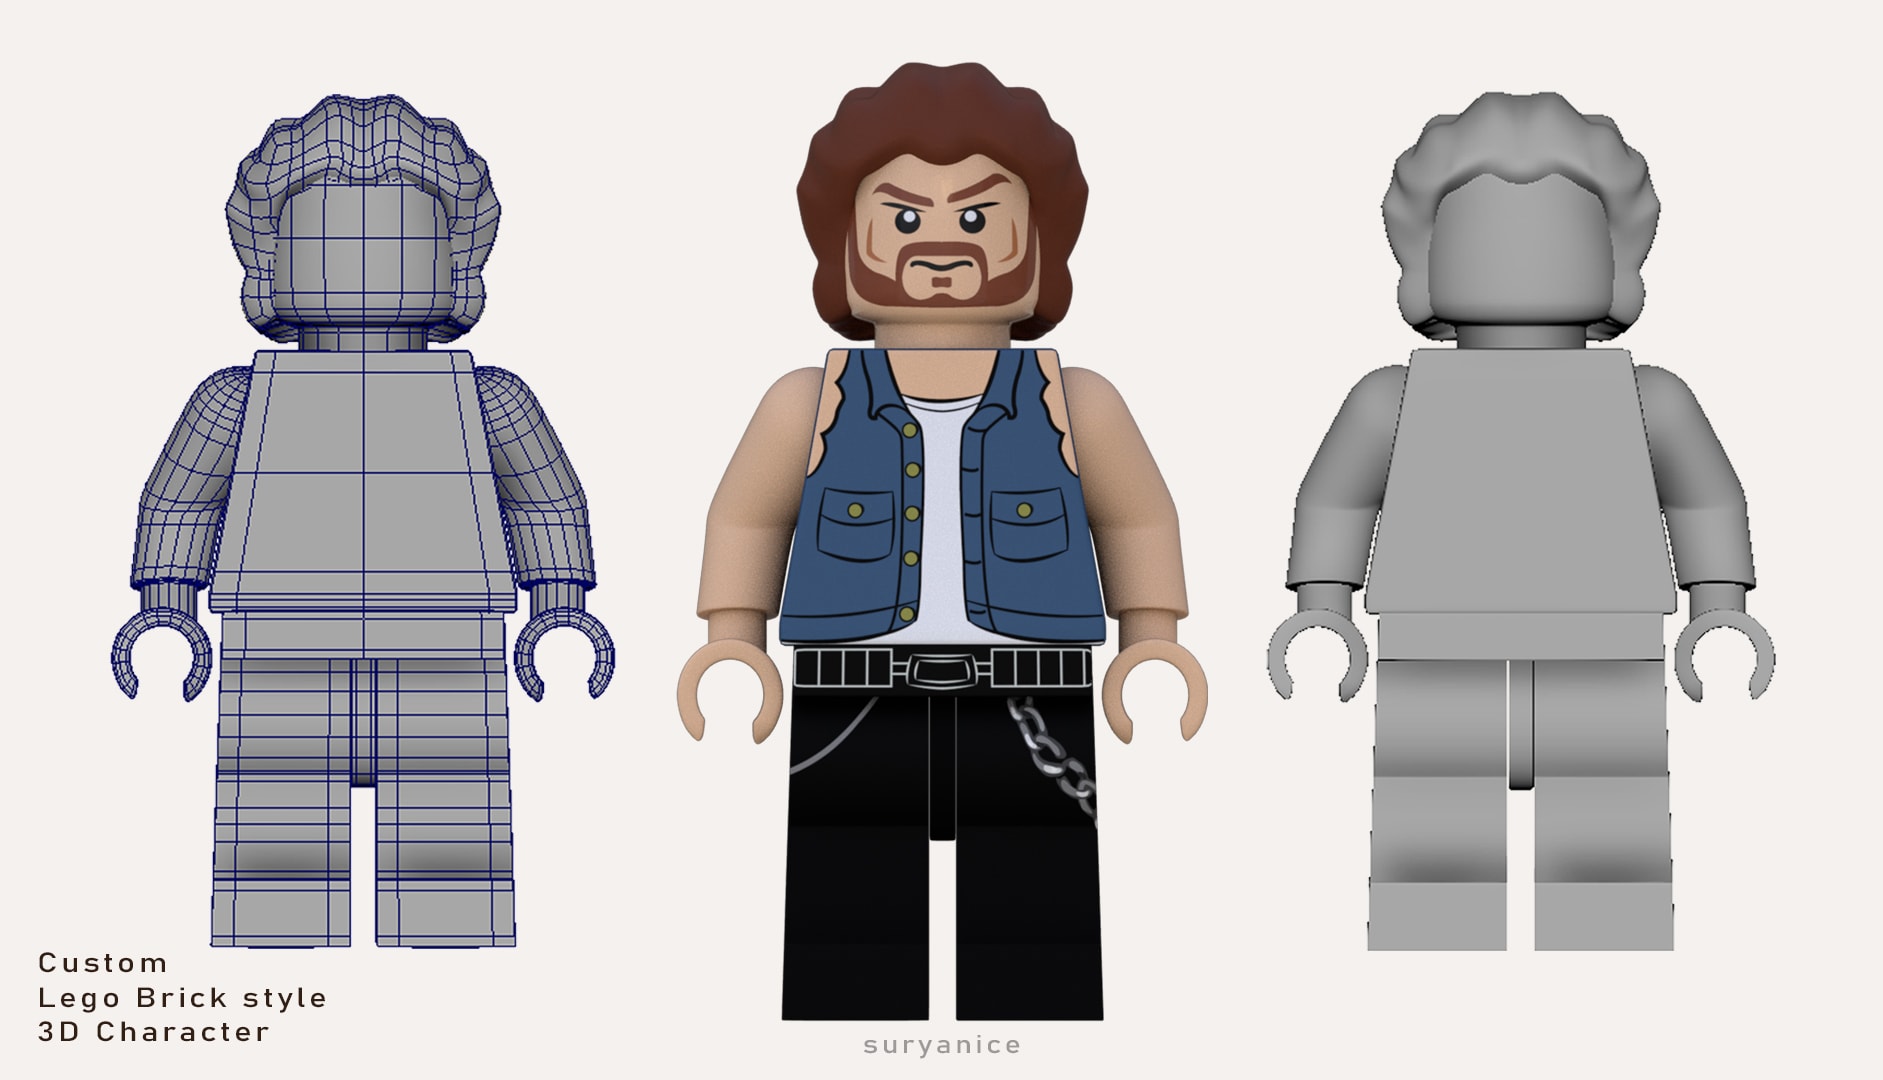 Create lego style 3d character for short animation or render by Suryanice |  Fiverr